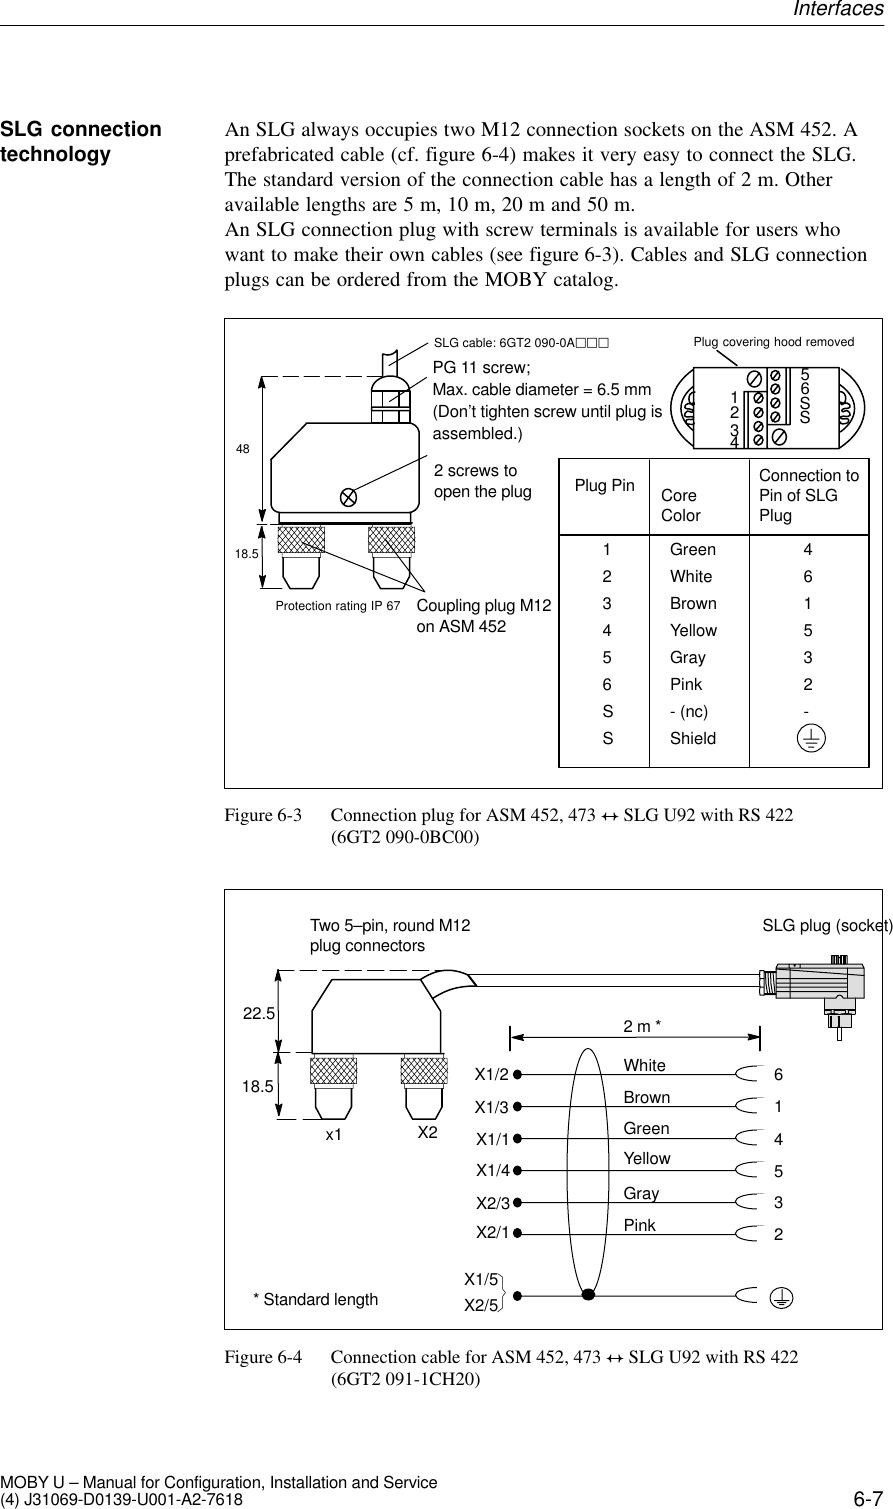 6-7MOBY U – Manual for Configuration, Installation and Service(4) J31069-D0139-U001-A2-7618An SLG always occupies two M12 connection sockets on the ASM 452. Aprefabricated cable (cf. figure 6-4) makes it very easy to connect the SLG.The standard version of the connection cable has a length of 2 m. Otheravailable lengths are 5 m, 10 m, 20 m and 50 m.An SLG connection plug with screw terminals is available for users whowant to make their own cables (see figure 6-3). Cables and SLG connectionplugs can be ordered from the MOBY catalog.SLG cable: 6GT2 090-0APG 11 screw; Max. cable diameter = 6.5 mm(Don’t tighten screw until plug isassembled.)2 screws toopen the plugCoupling plug M12on ASM 452123456SSPlug Pin123456SSCoreColorGreenWhiteBrownYellowGrayPink- (nc)ShieldConnection toPin of SLGPlug461532-Plug covering hood removedProtection rating IP 674818.5Figure 6-3 Connection plug for ASM 452, 473  SLG U92 with RS 422 (6GT2 090-0BC00)614532Two 5–pin, round M12plug connectorsX1/2X1/3X1/1X1/4X2/3X2/1X1/5X2/5x1 X2WhiteBrownGreenYellowGrayPinkSLG plug (socket)2 m *22.518.5* Standard lengthFigure 6-4 Connection cable for ASM 452, 473  SLG U92 with RS 422 (6GT2 091-1CH20)SLG connectiontechnologyInterfaces